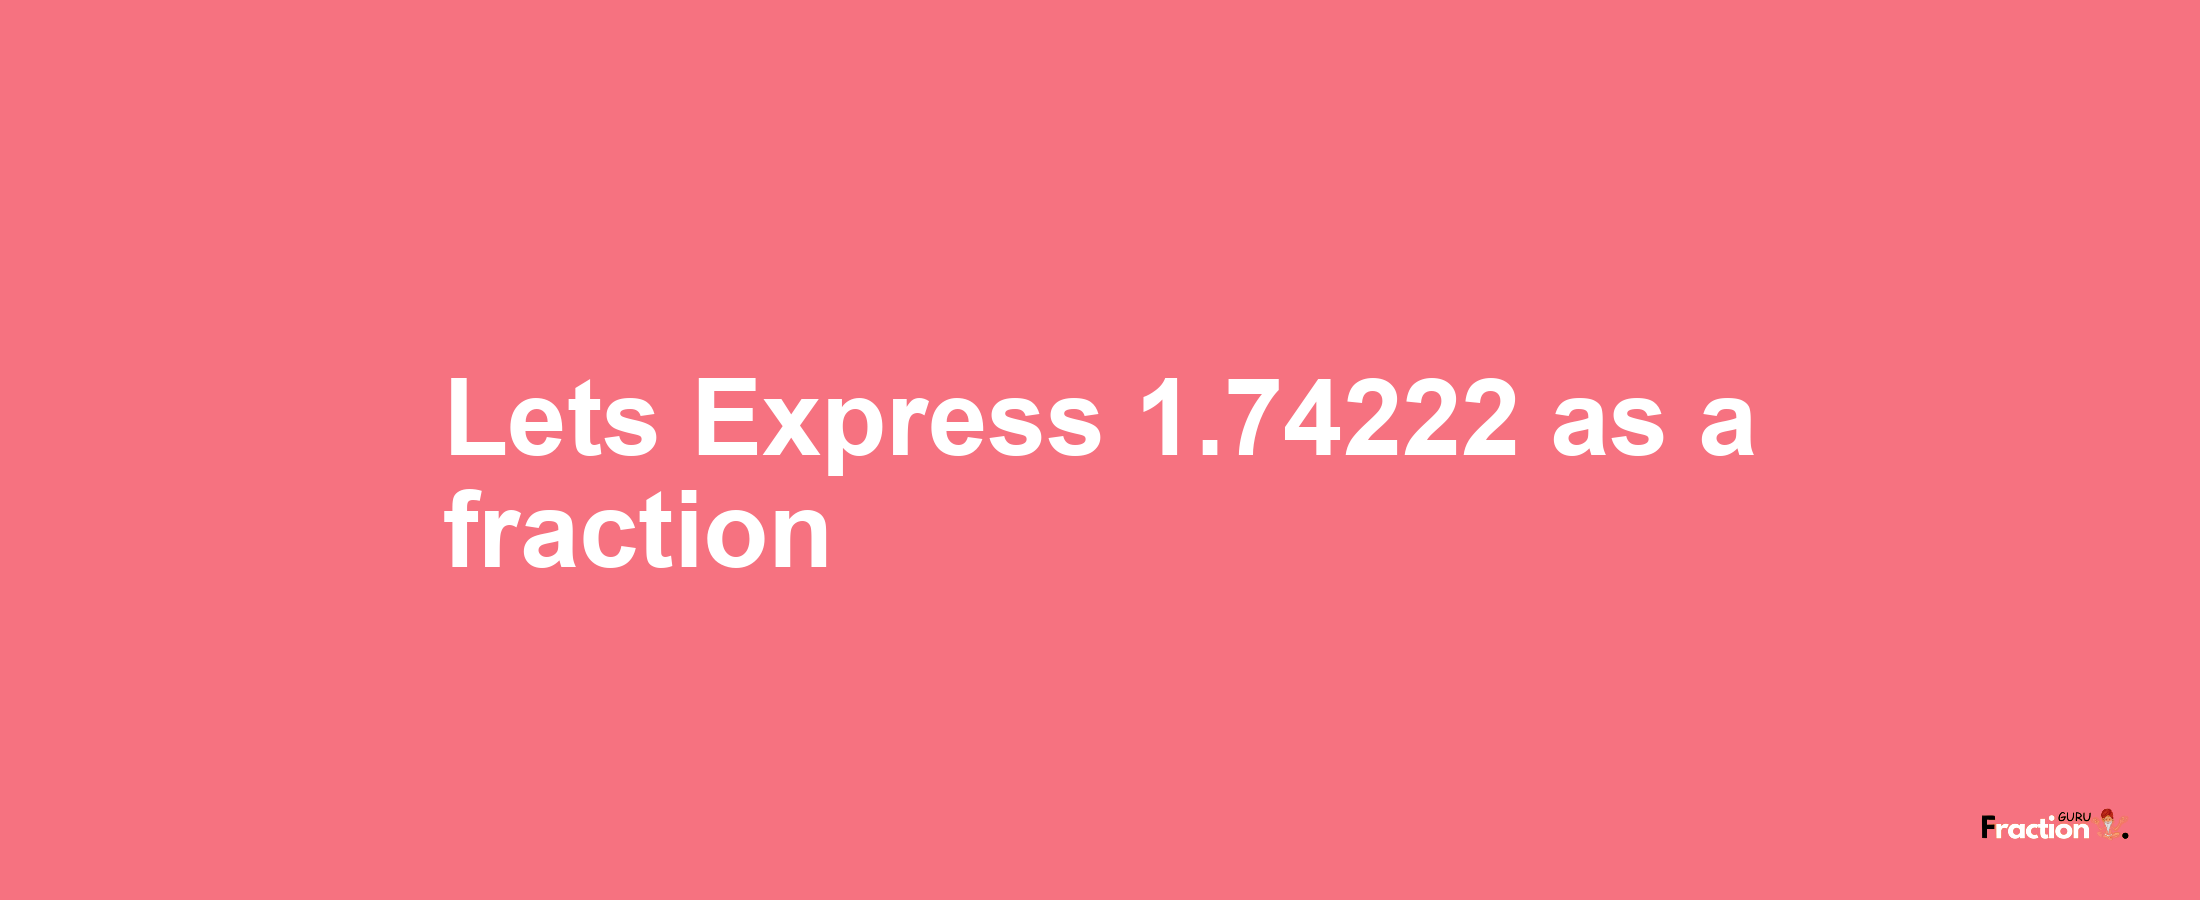 Lets Express 1.74222 as afraction